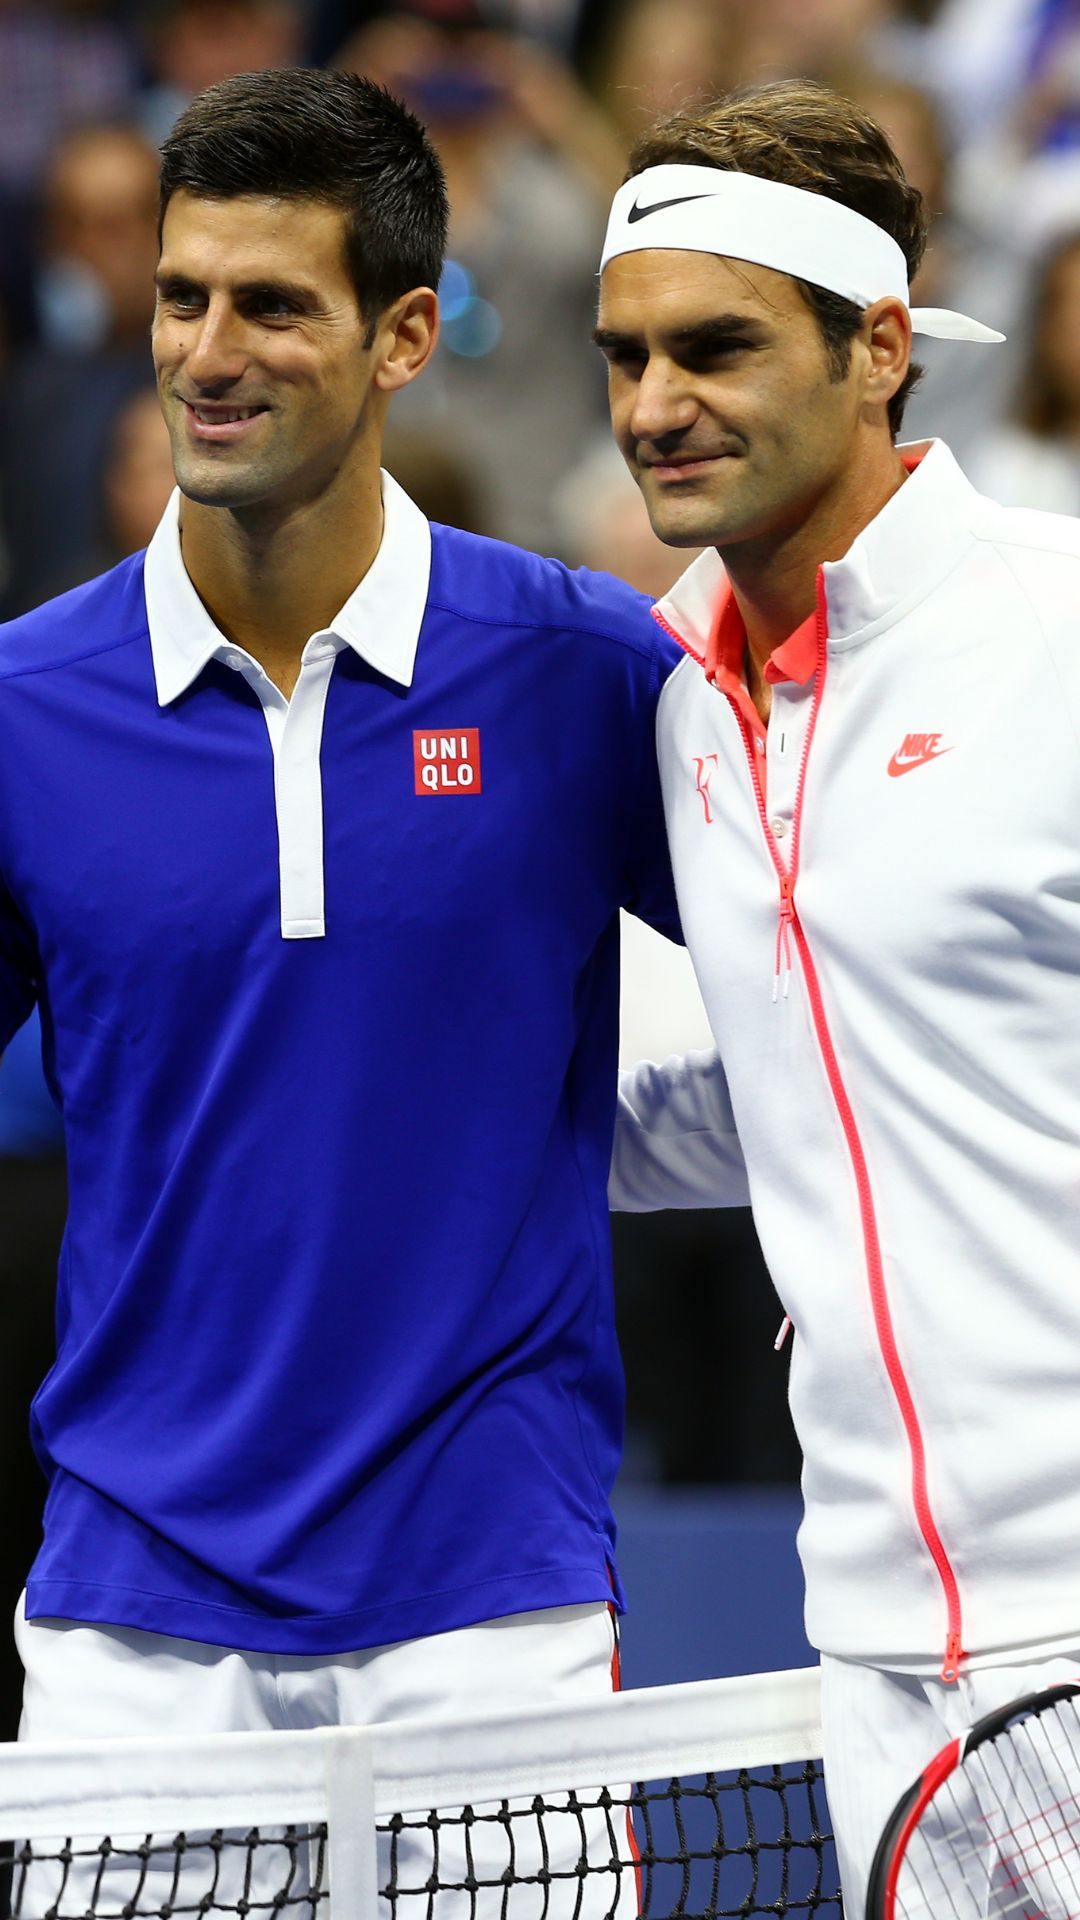 Tennis players with most US Open titles (Open Era) as Novak Djokovic chases Rafael Nadal and Roger Federer 